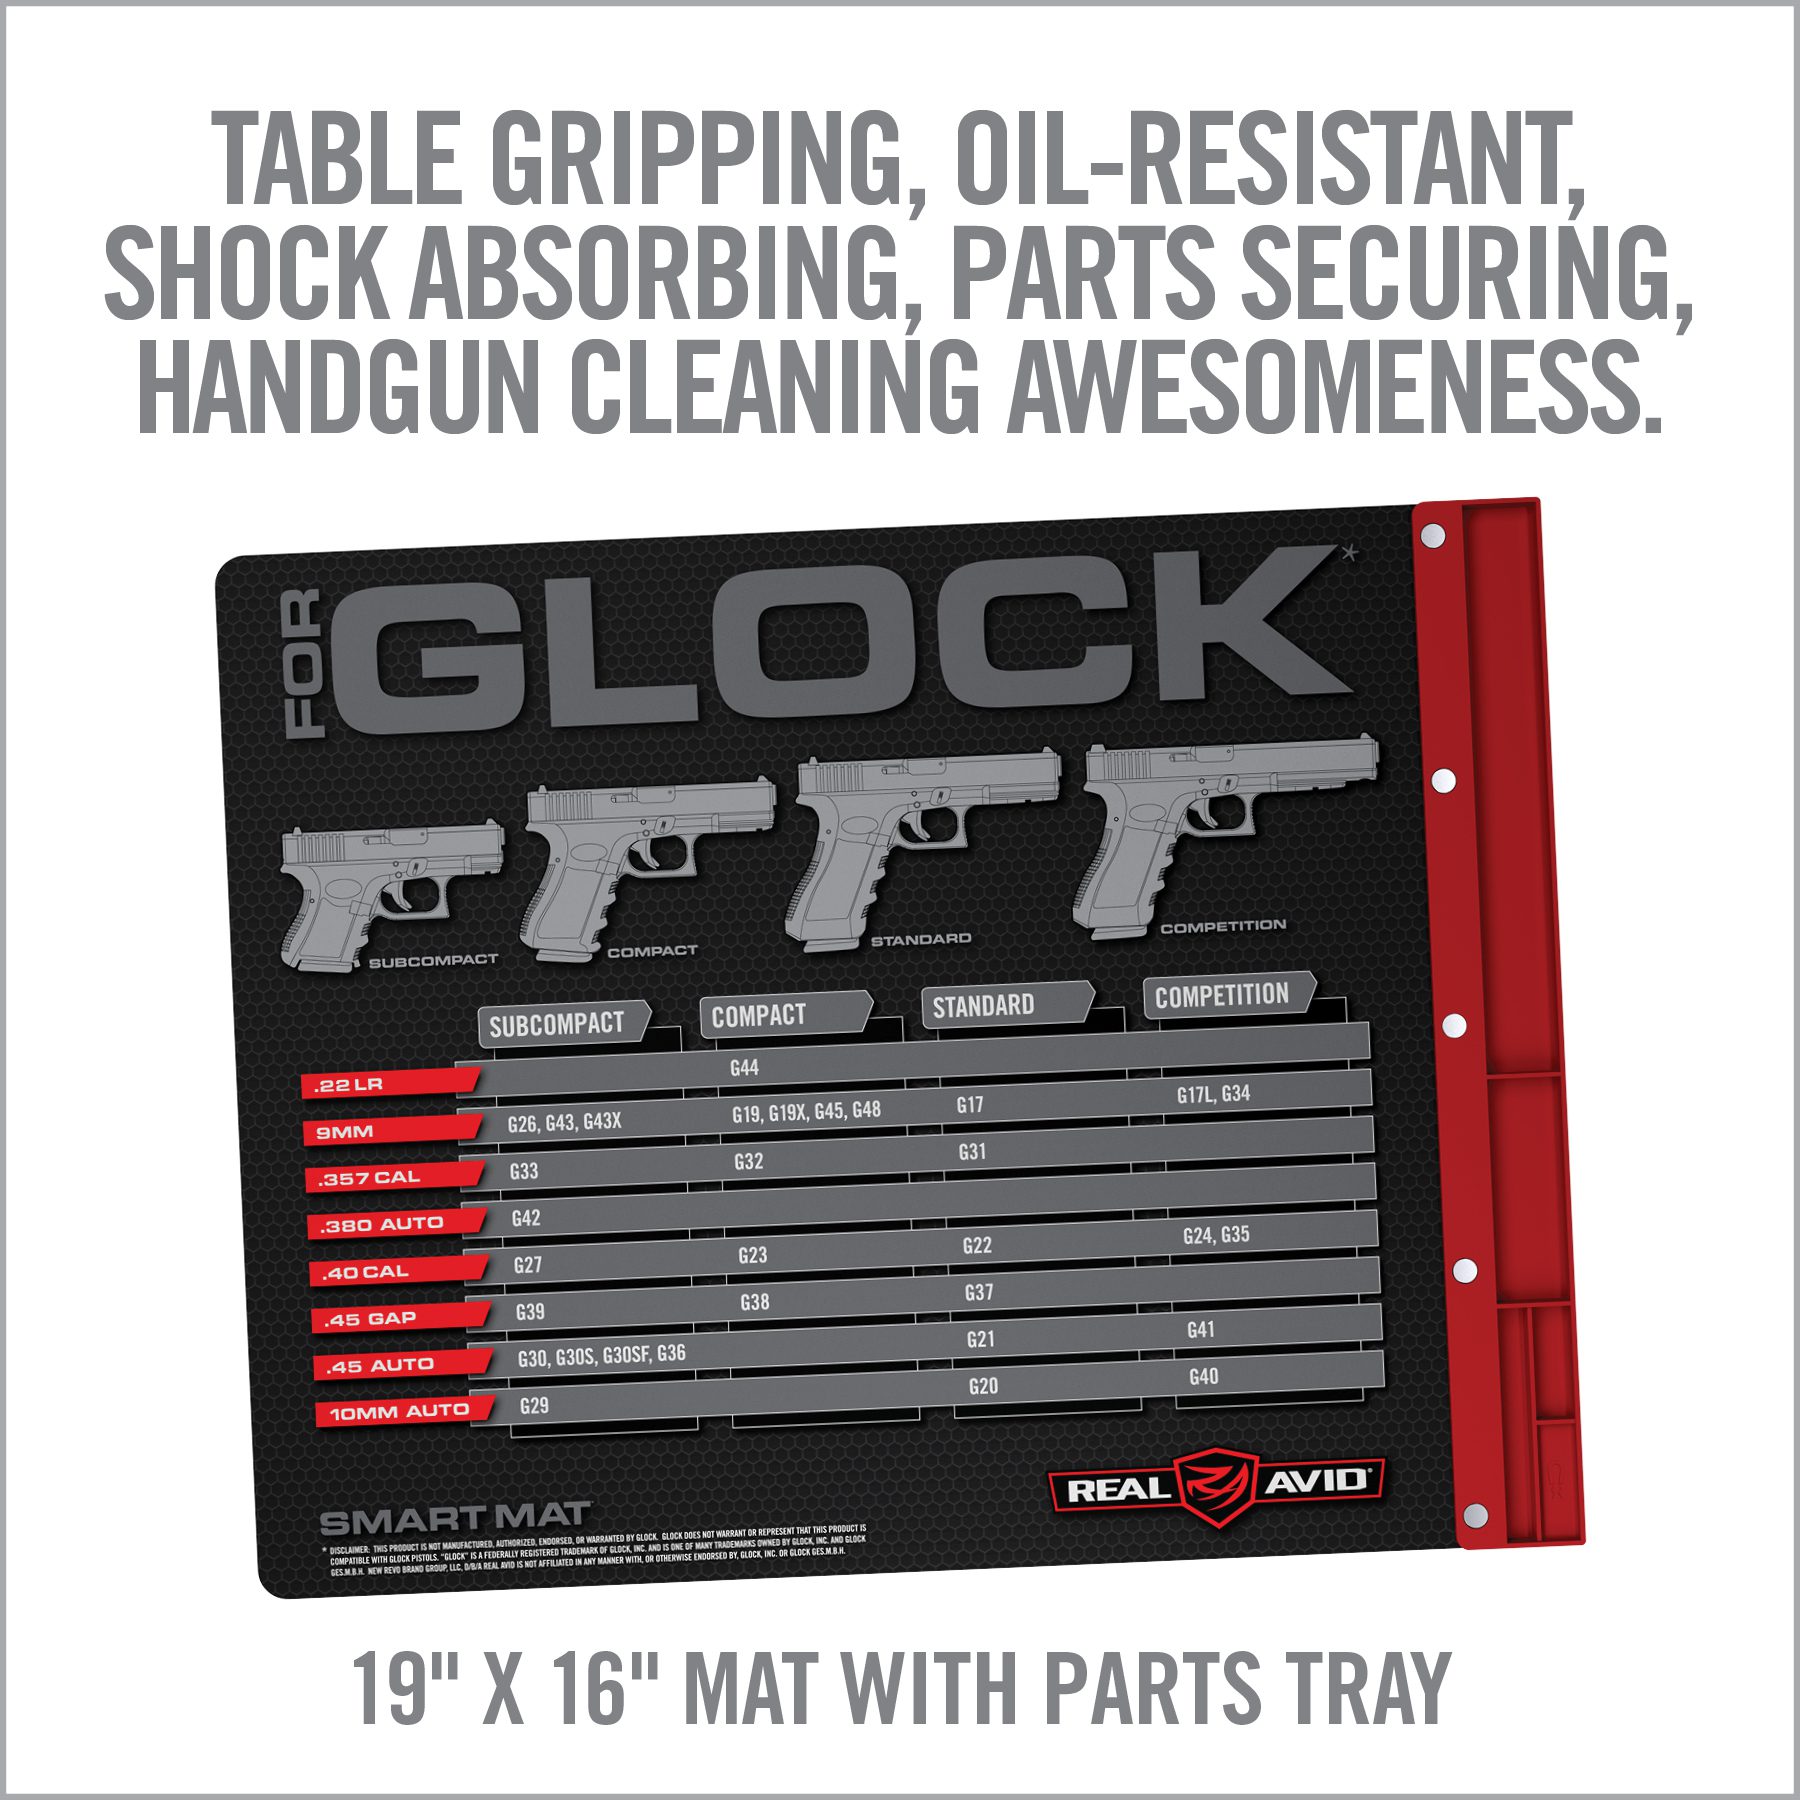 the glock gun cleaning kit is shown with instructions